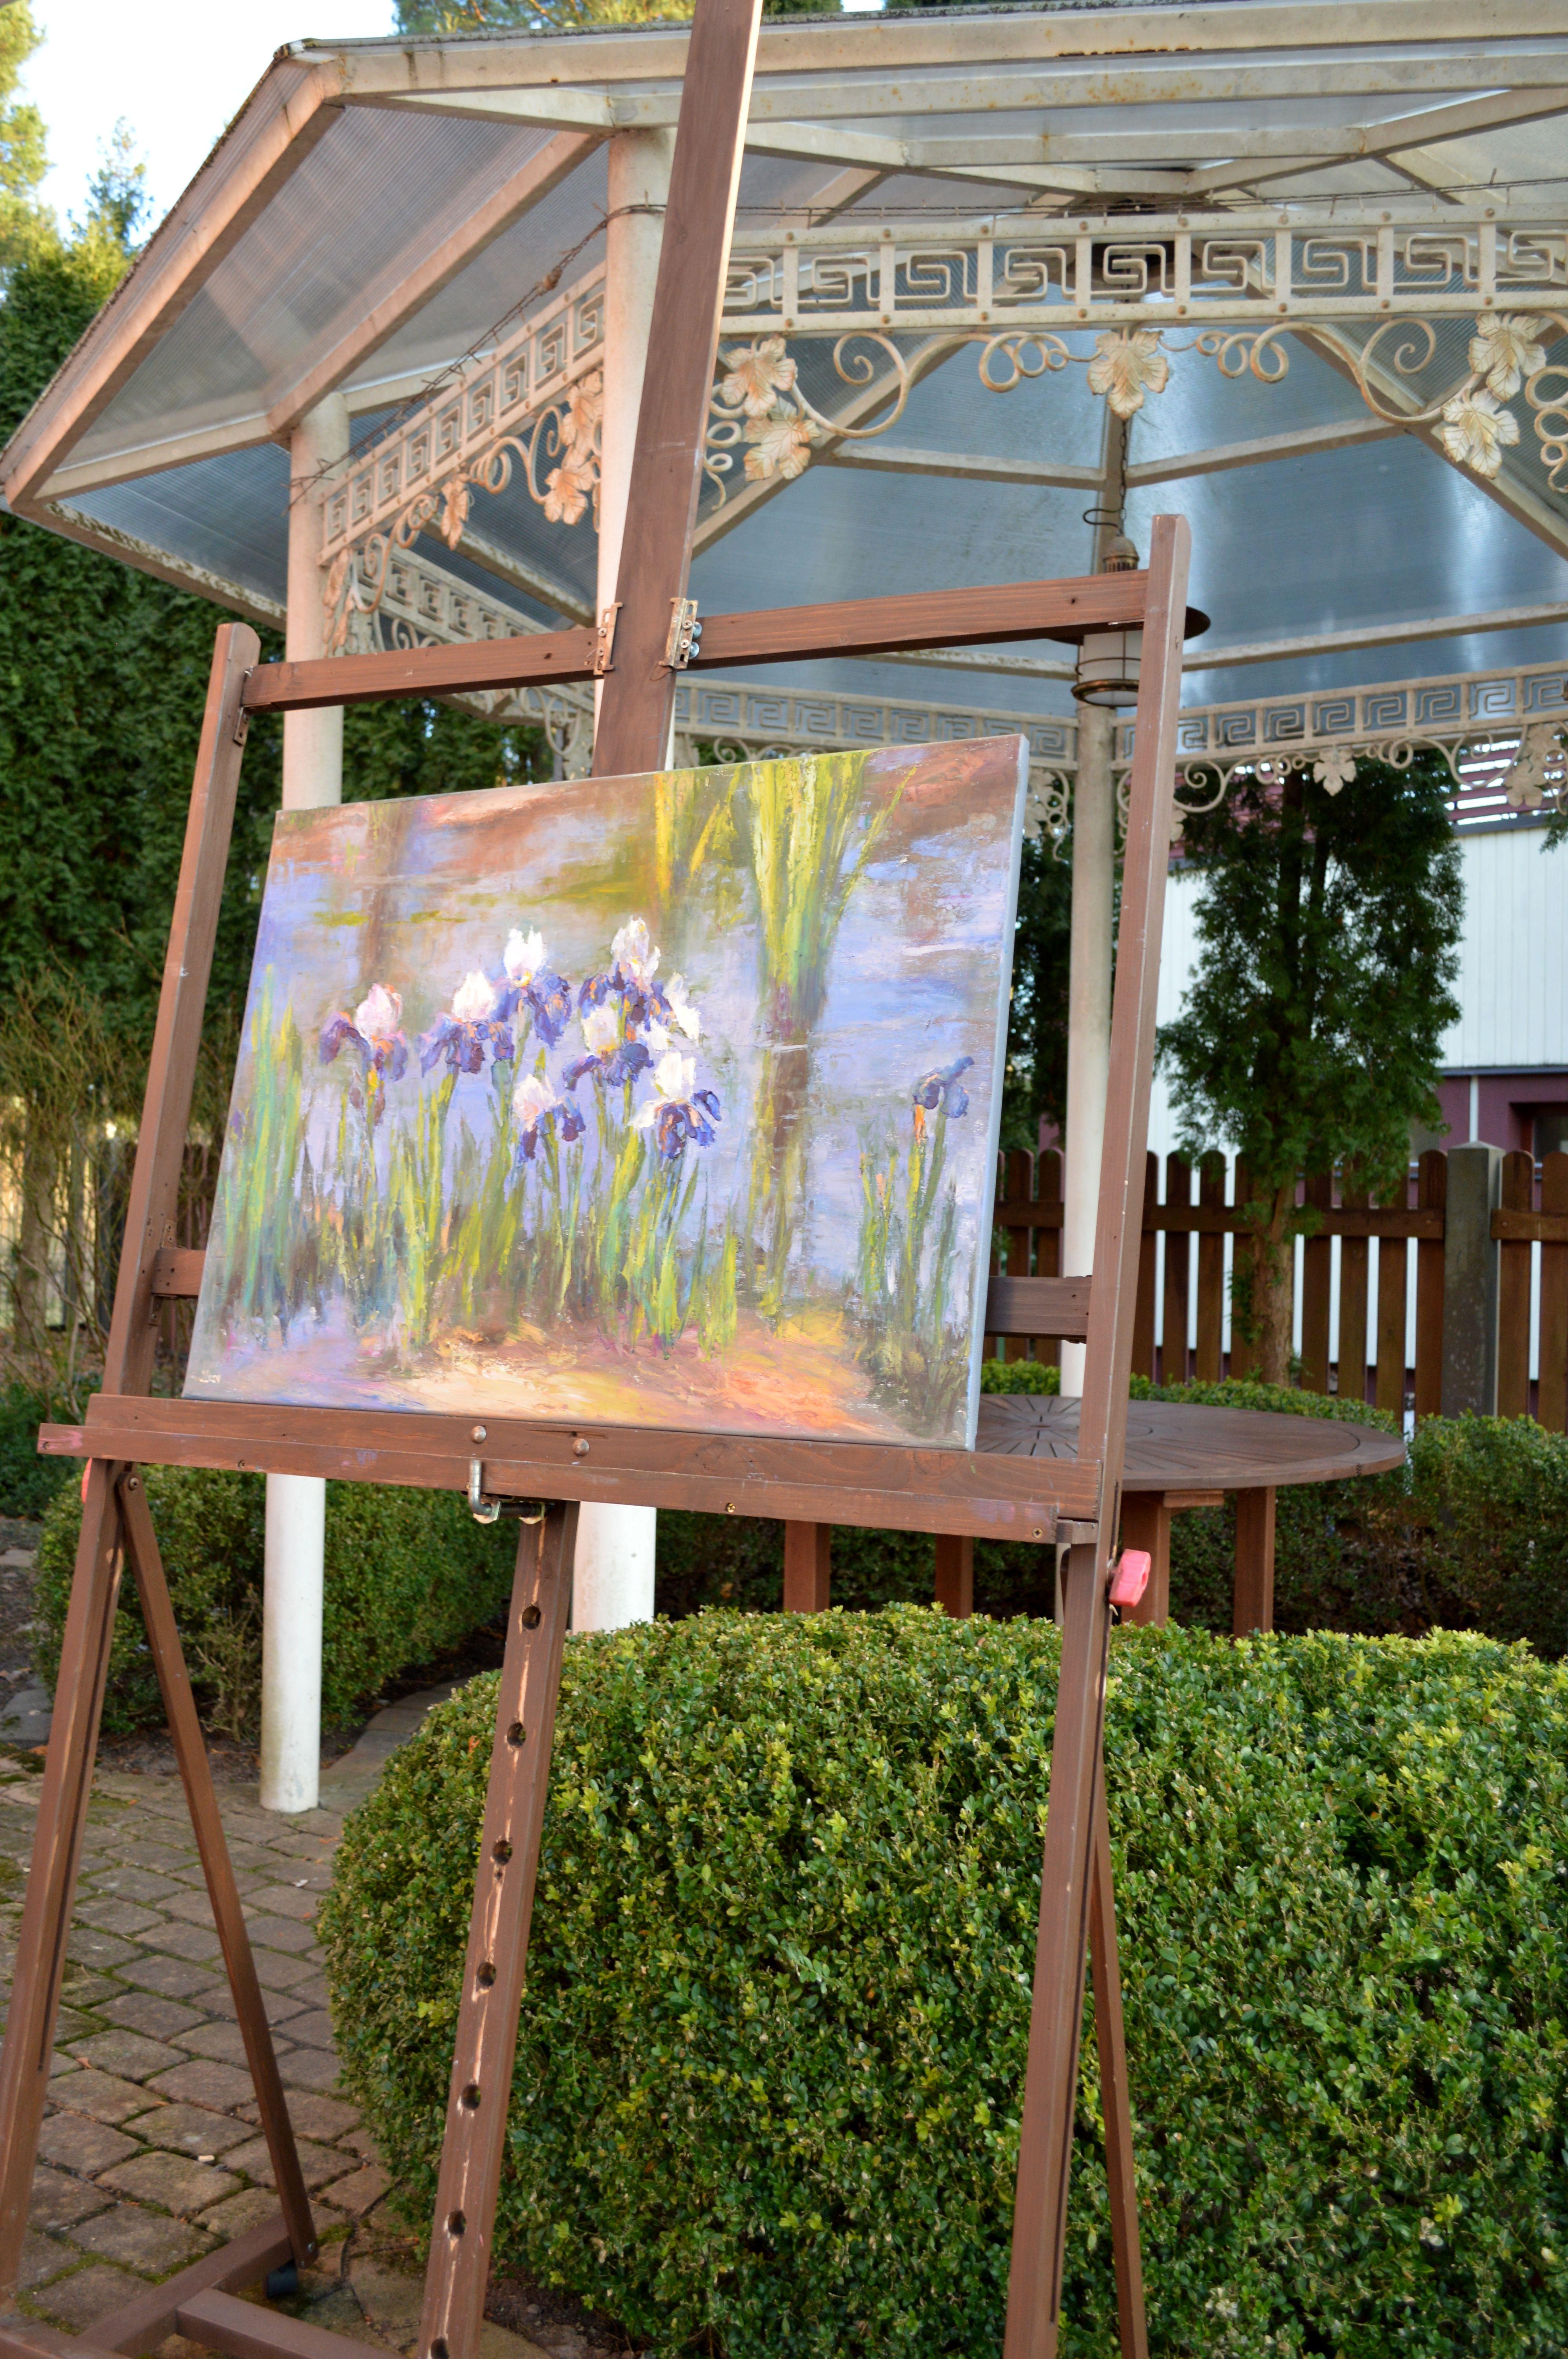 In this oil painting, I captured the essence of serenity and growth. Embracing the harmonious dance of light and shadow, I portrayed the irises with an impressionistic touch, evoking a sense of gentle movement in nature's stillness. This artwork